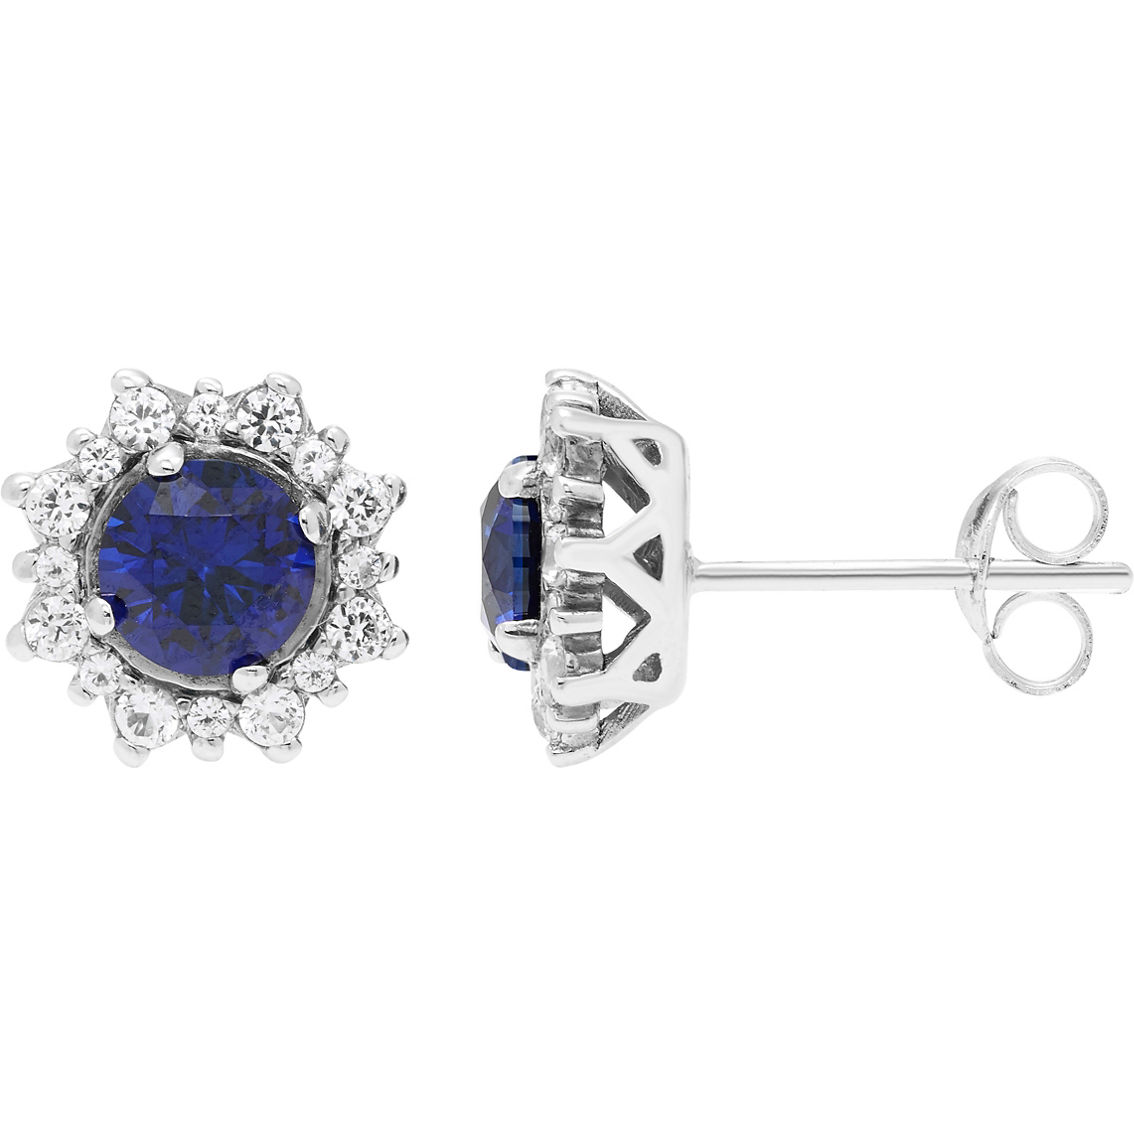 Sterling Silver Lab Created Blue and White Sapphire Pendant and Stud Earrings Set - Image 3 of 4